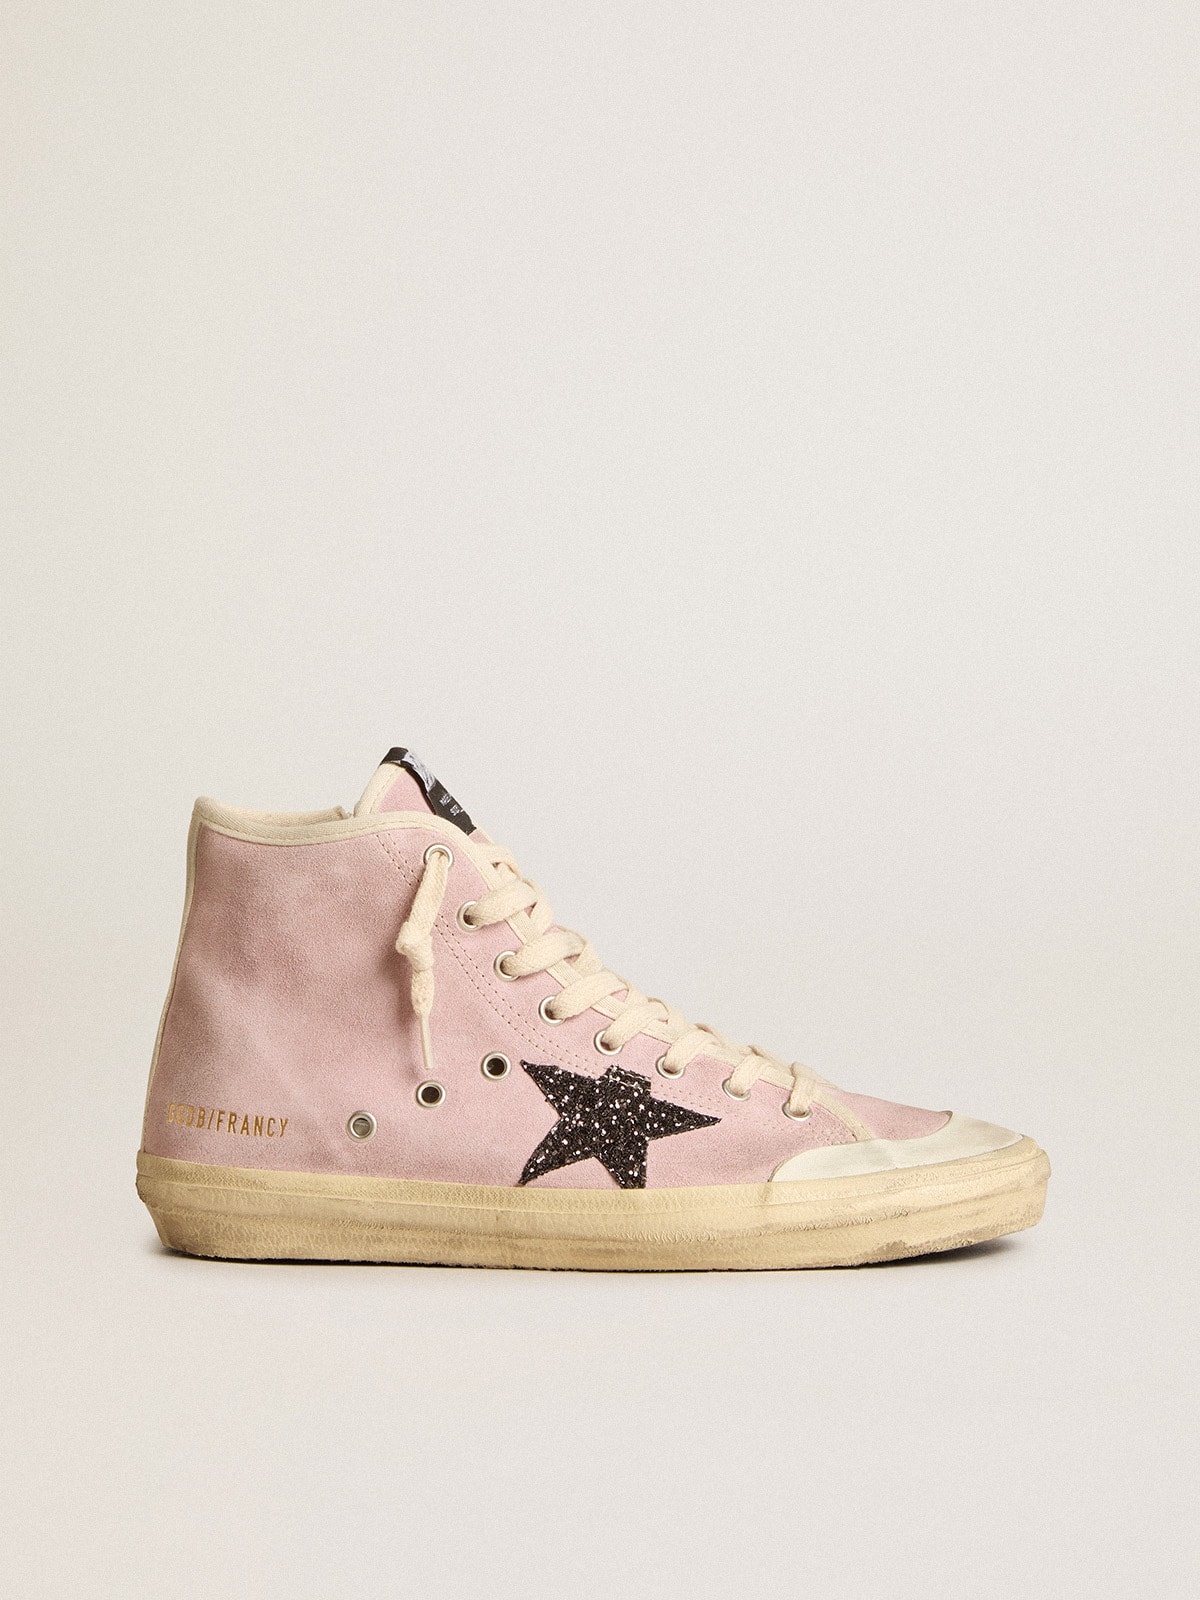 Francy Penstar in pink suede with gray glitter star - 1